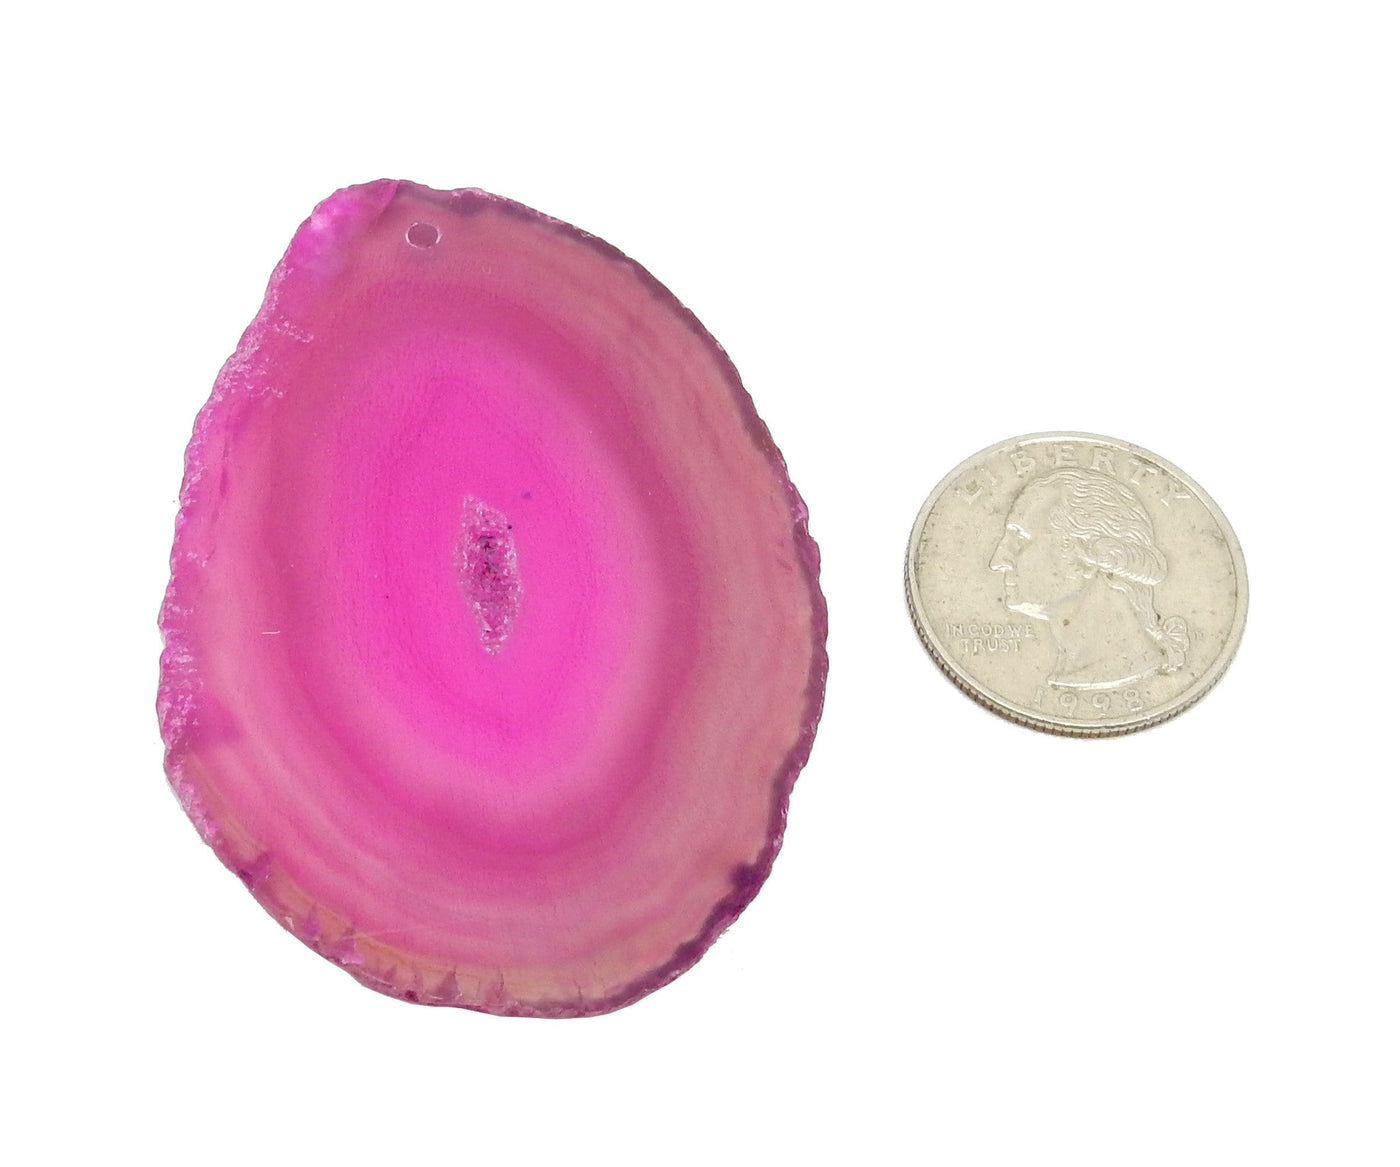 Pink agate slice drilled next to a Quarter on White Background. 